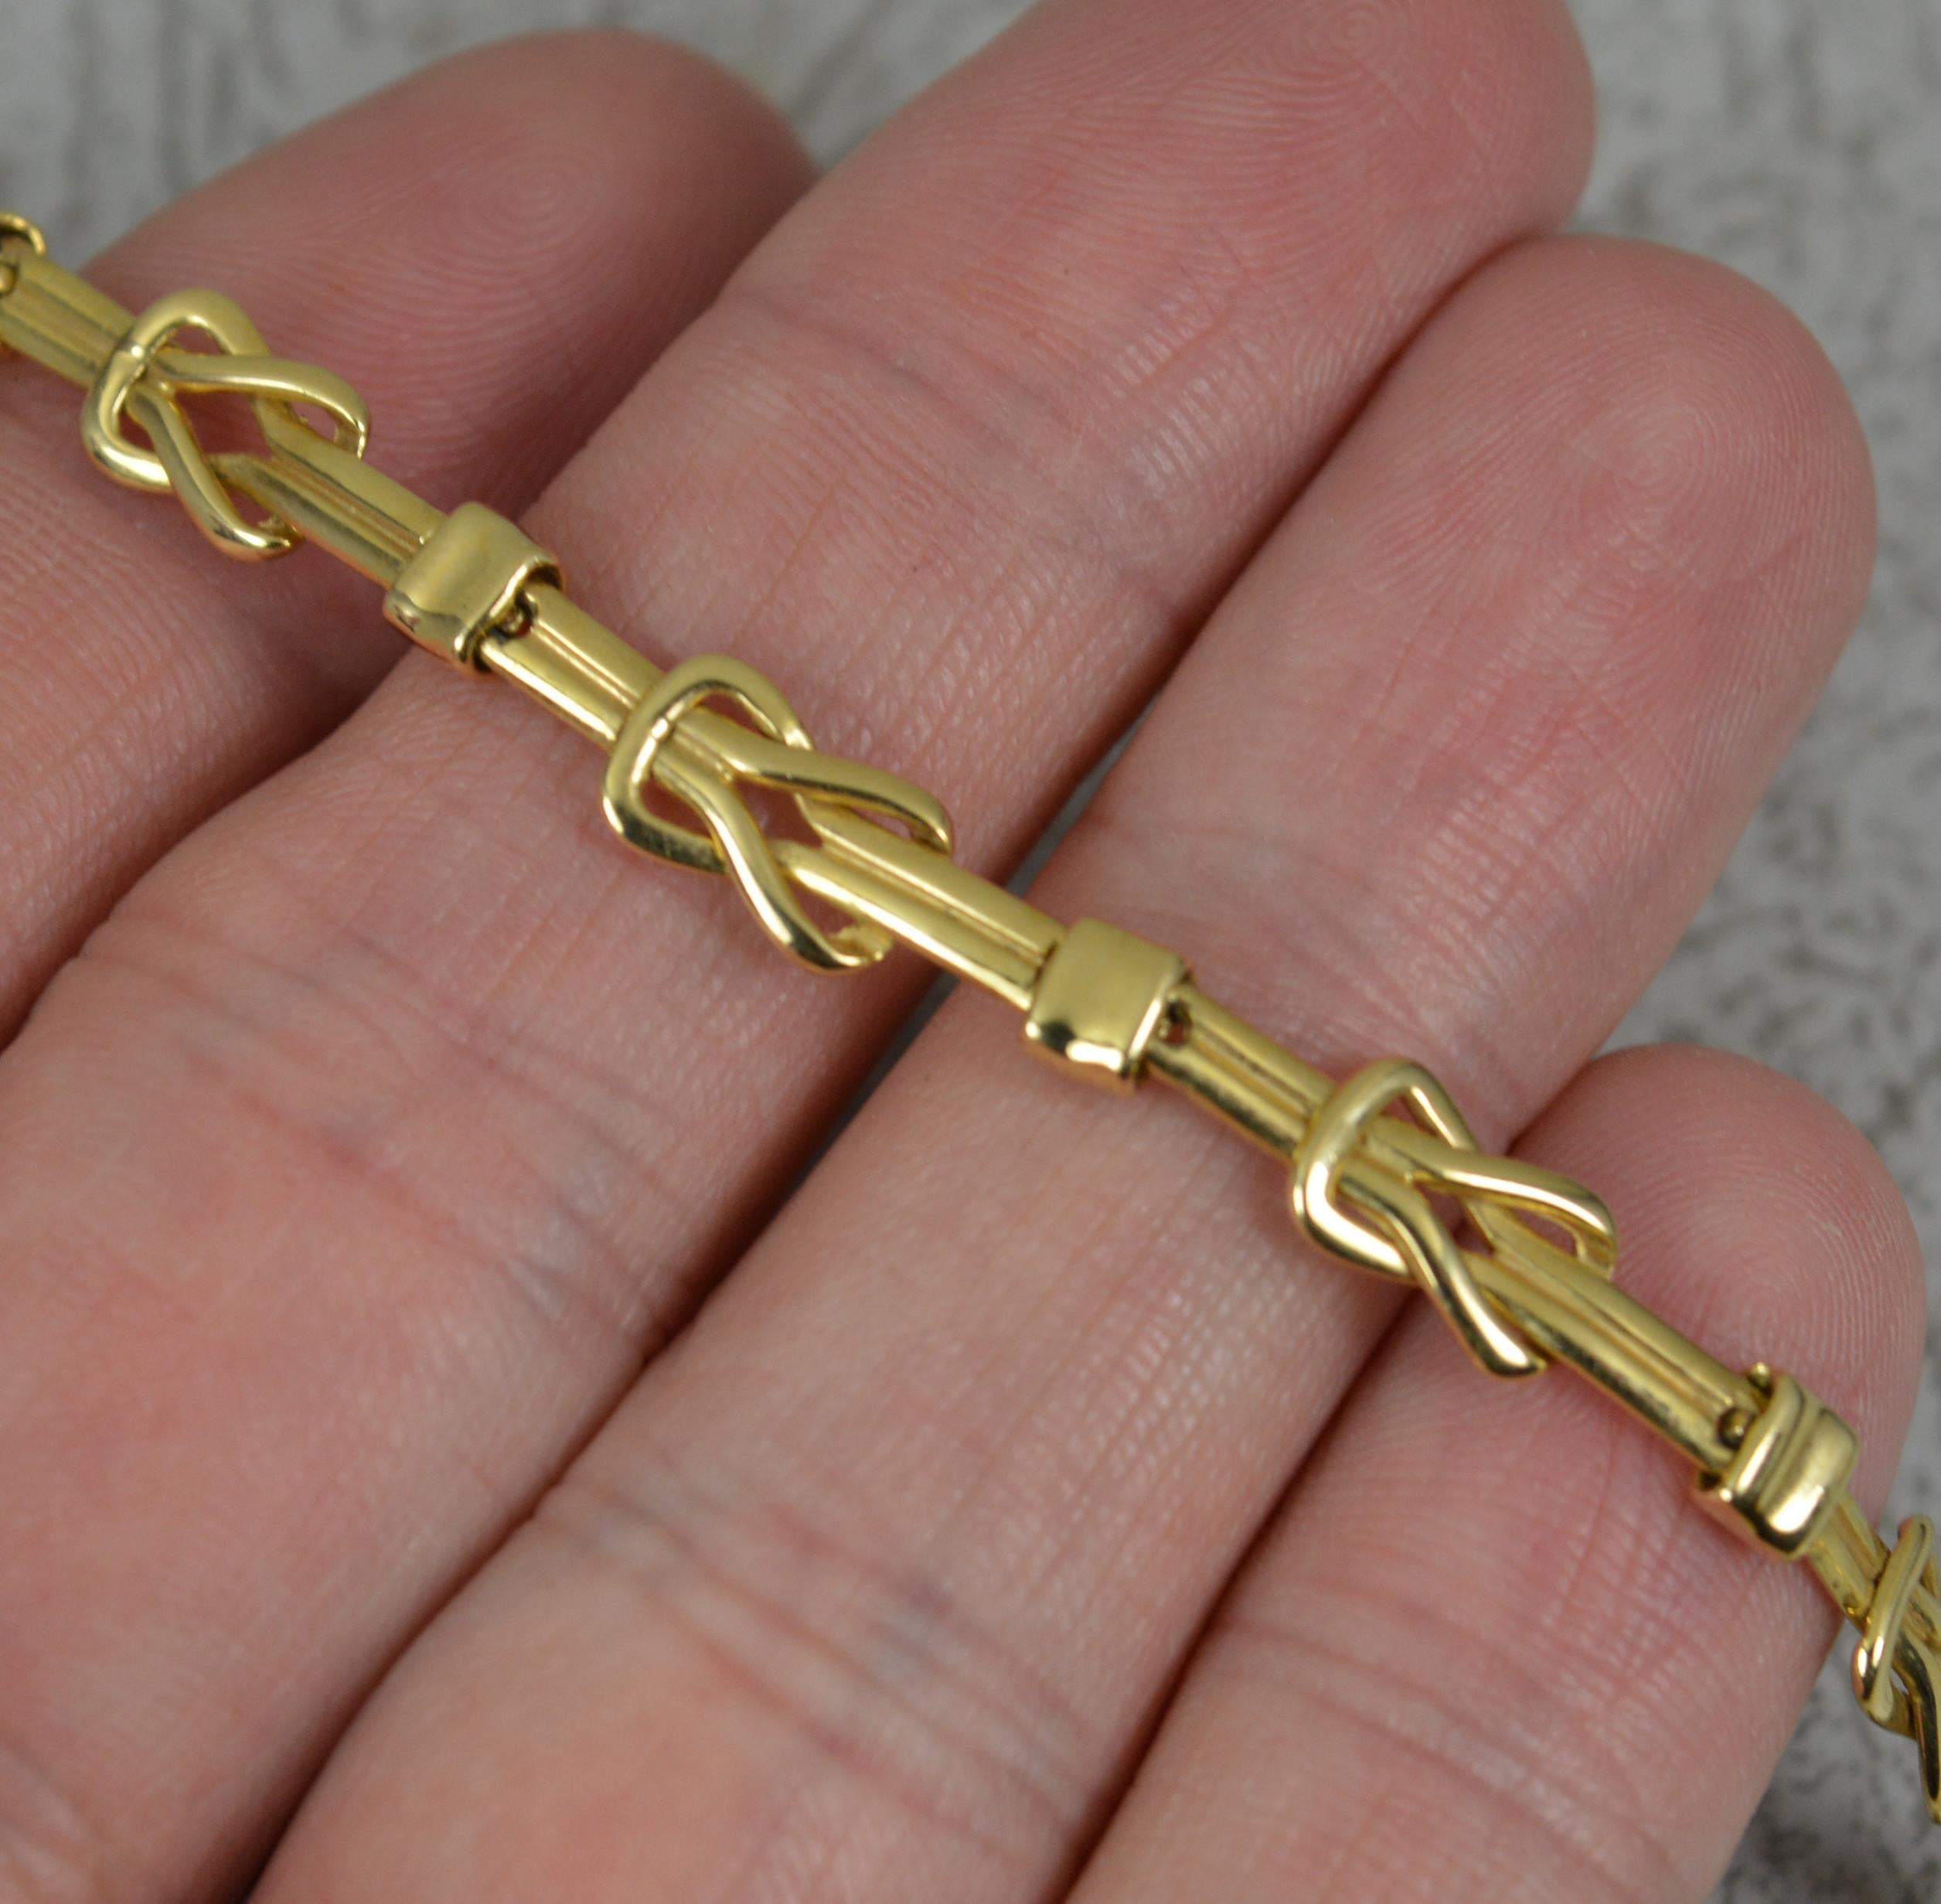 An 18 carat yellow gold necklace chain.
Well made and solid links.
A kiss link design.

CONDITION ; Very good. Crisp design. Working clasp. Issue free. Light wear to clasp. Please view photographs.

WEIGHT ; 22.4 grams
SIZE ; 5.7mm wide links,